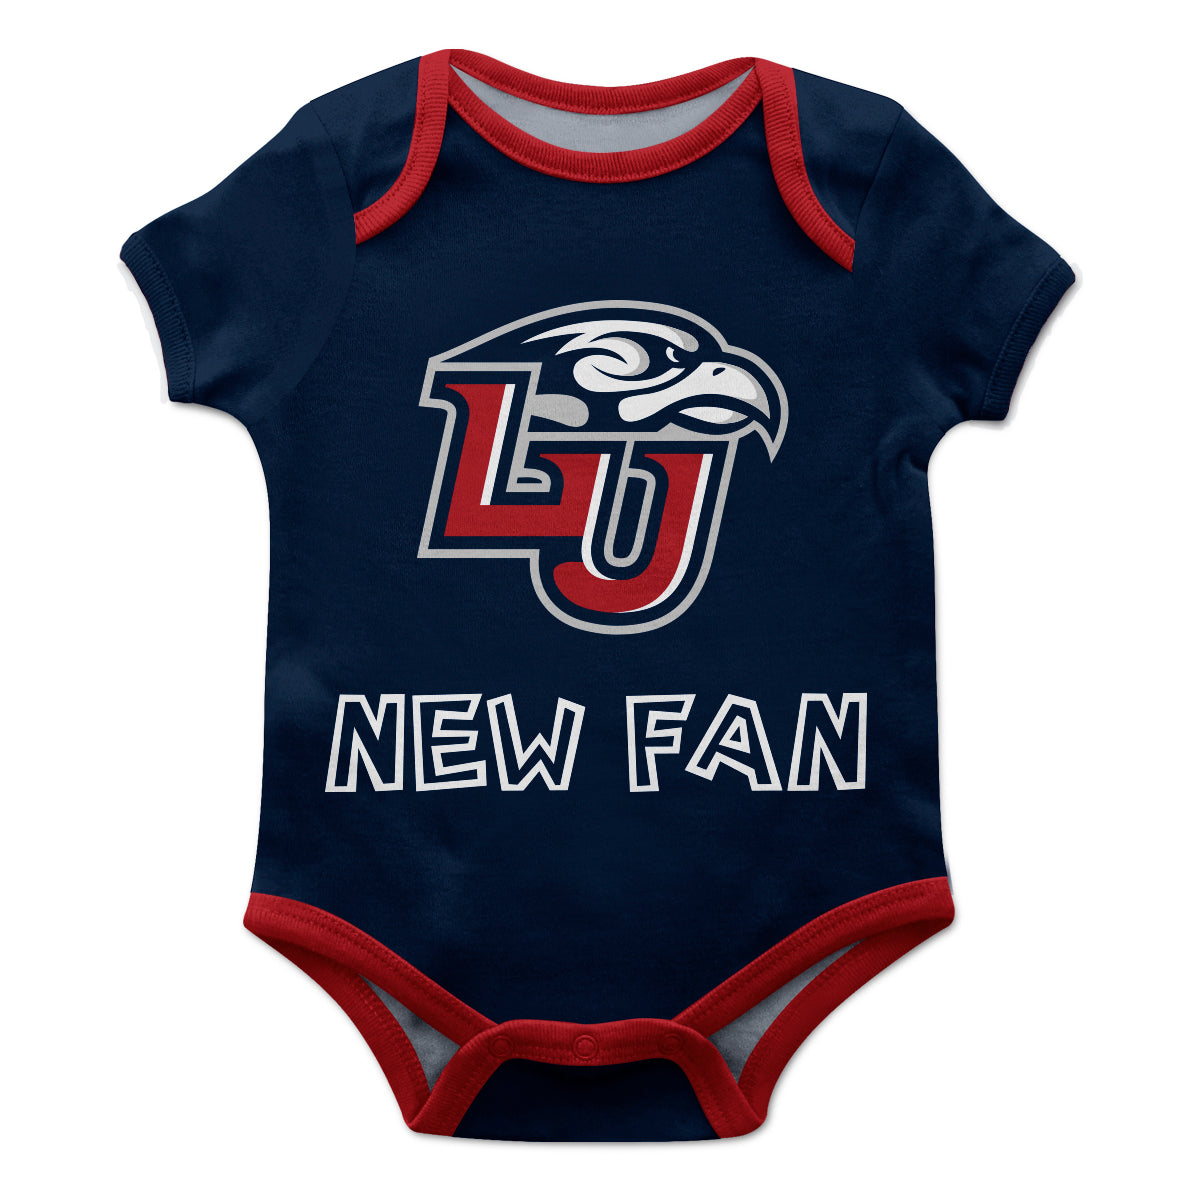 Liberty Flames Infant Game Day Navy Short Sleeve One Piece Jumpsuit by Vive La Fete